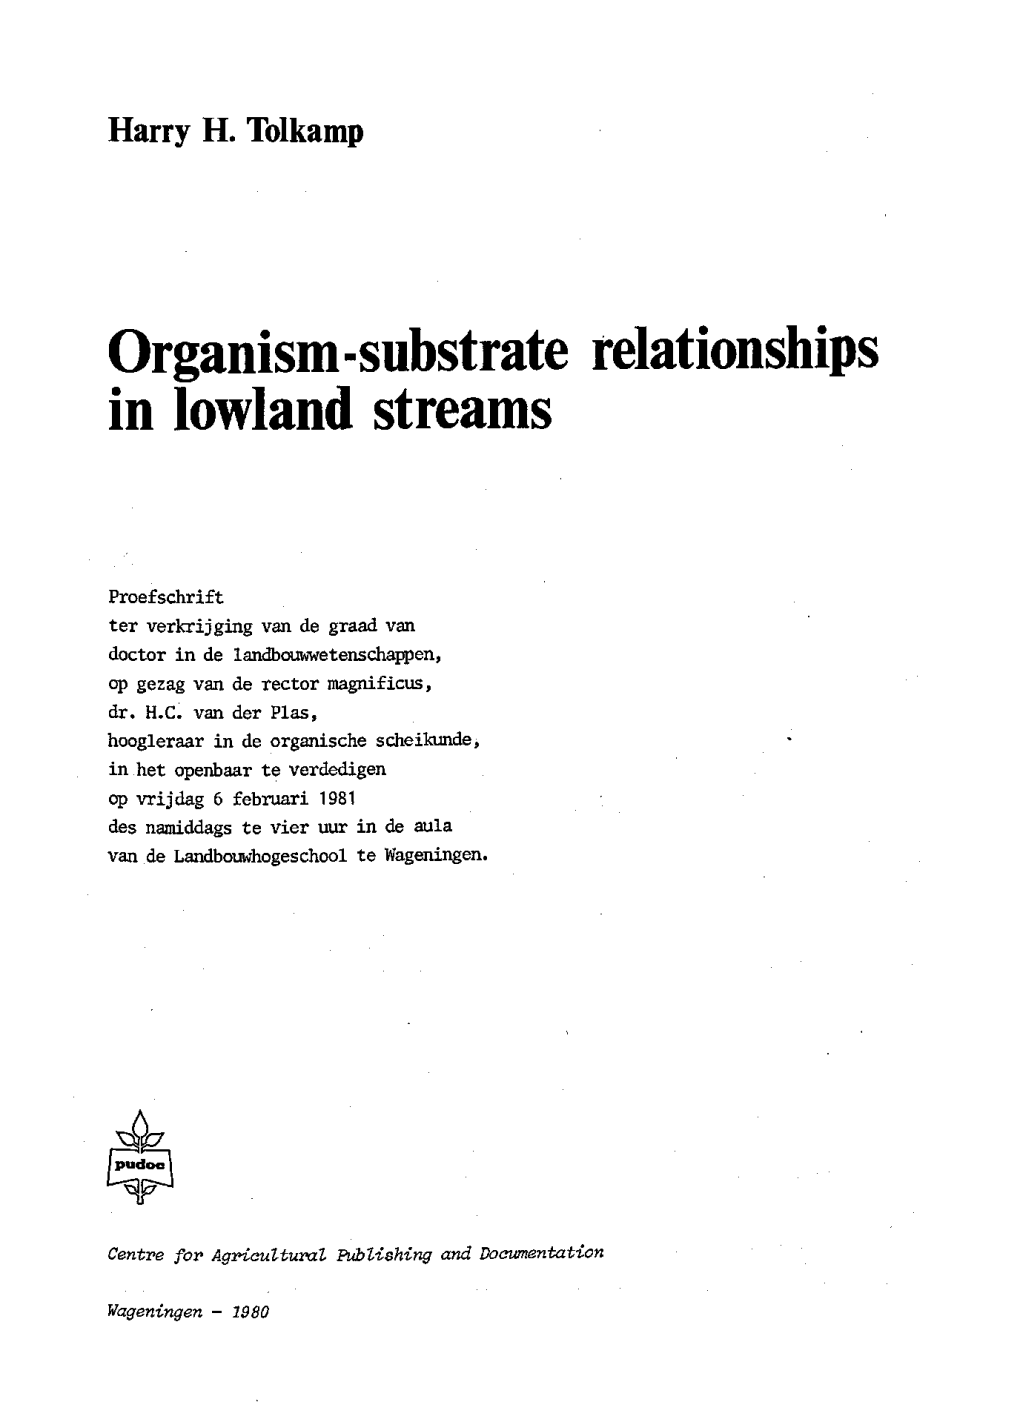 Organism-Substrate Relationships in Lowland Streams